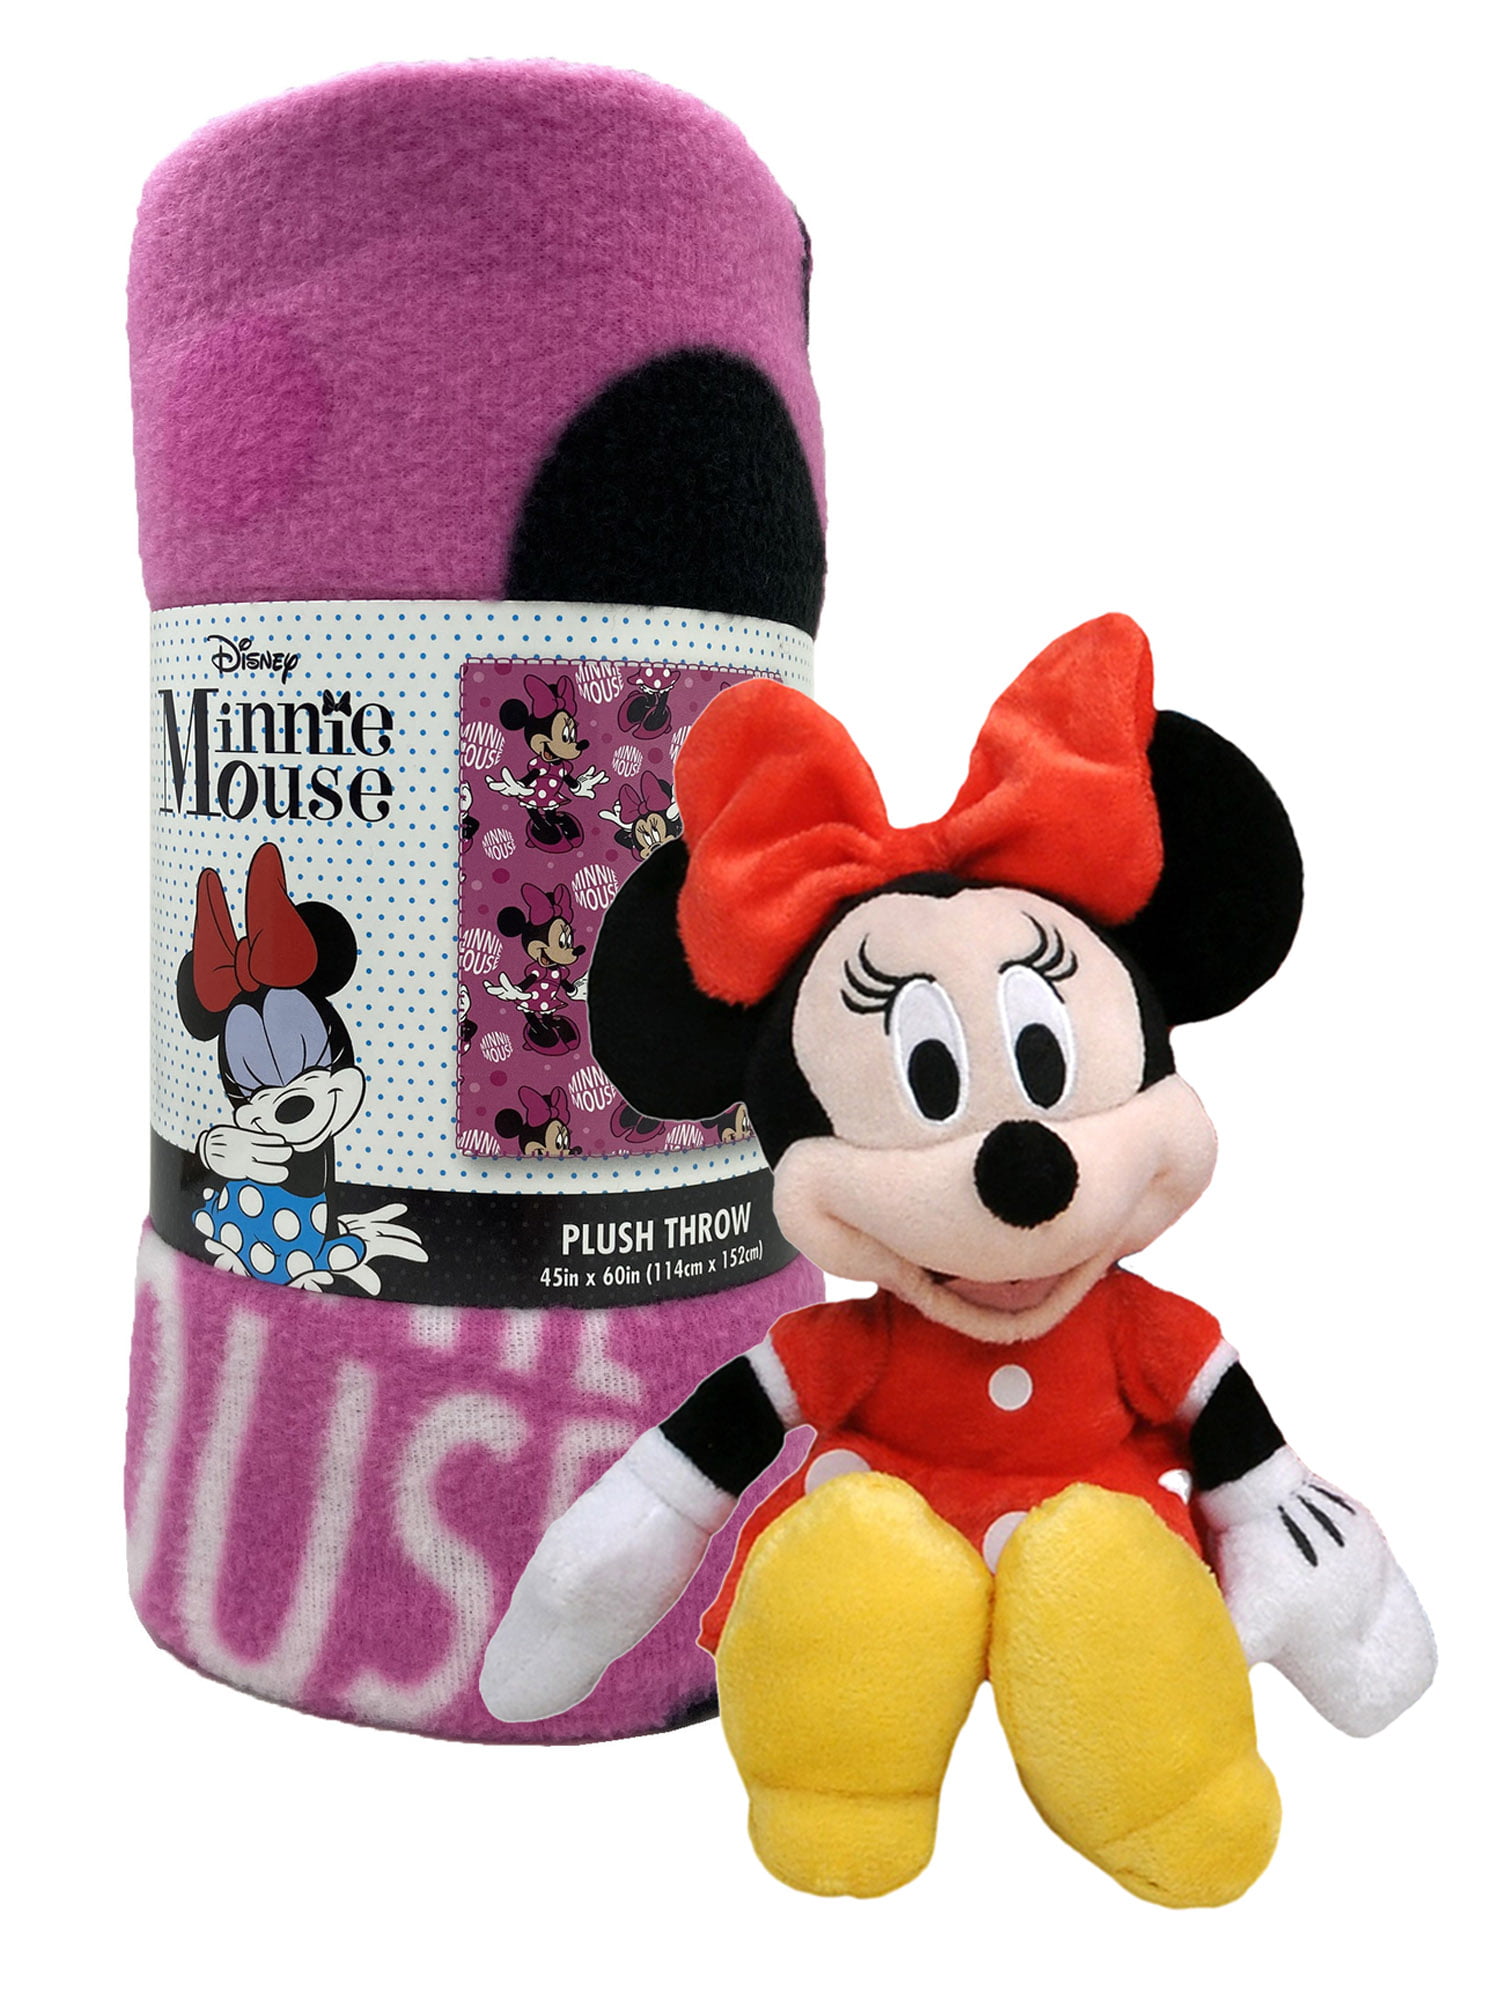 Soft Touch Polar Fleece Blanket,Official Licenced Minnie & Mickey Mouse Blanket 